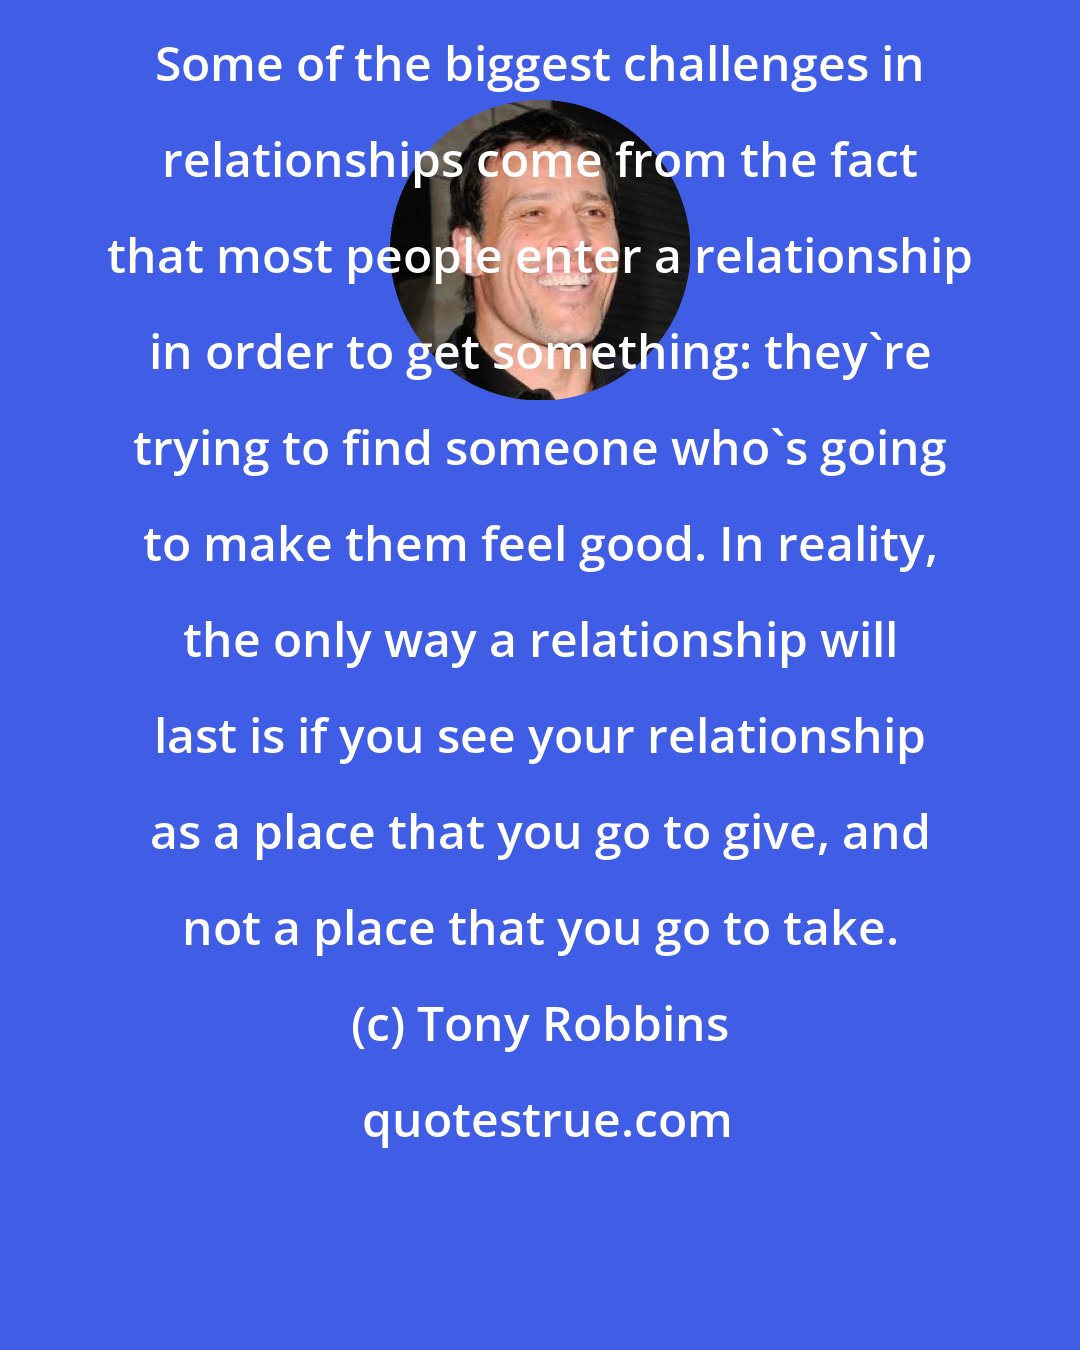 Tony Robbins: Some of the biggest challenges in relationships come from the fact that most people enter a relationship in order to get something: they're trying to find someone who's going to make them feel good. In reality, the only way a relationship will last is if you see your relationship as a place that you go to give, and not a place that you go to take.